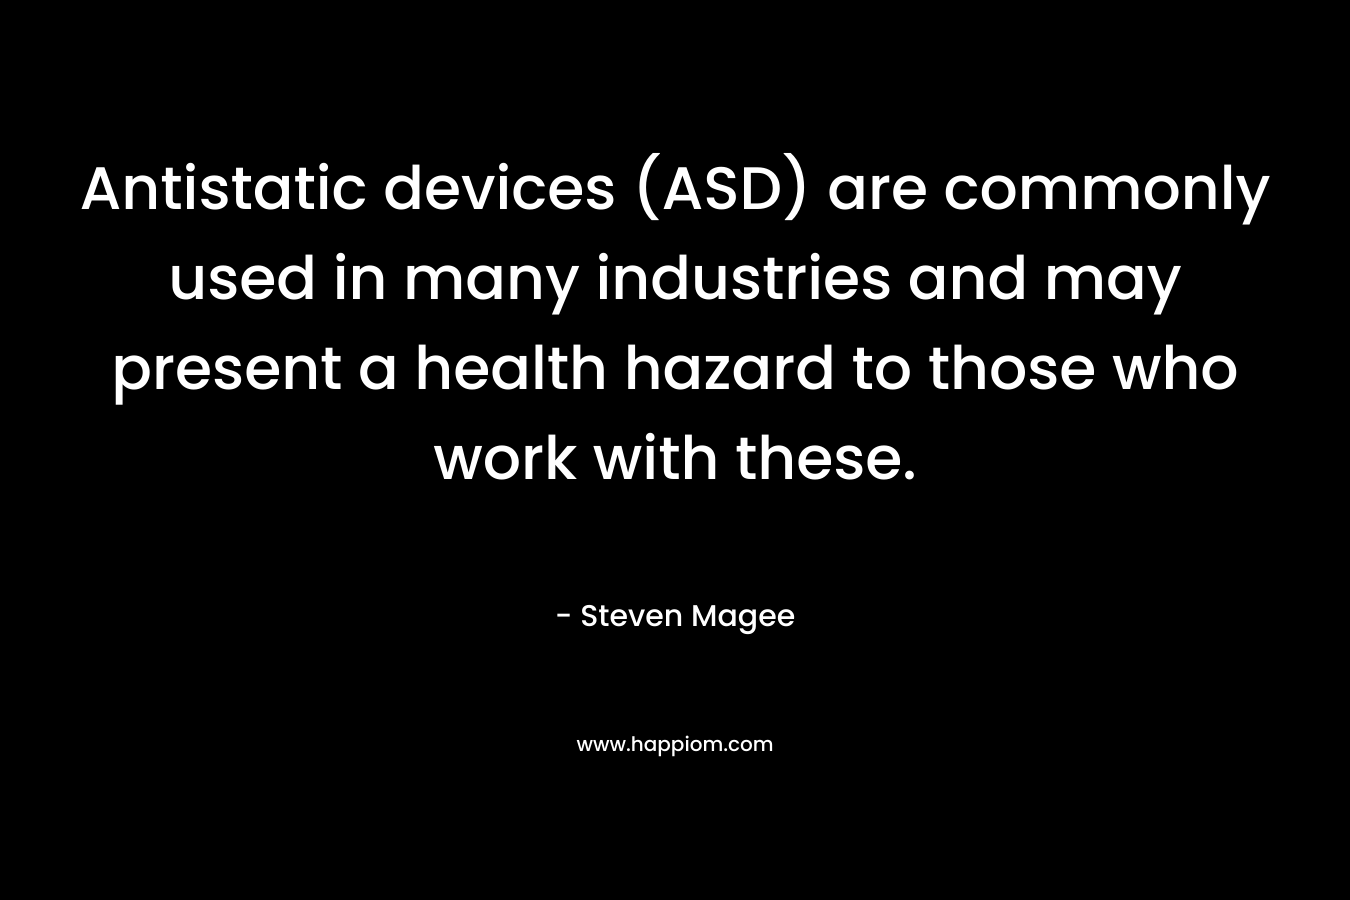 Antistatic devices (ASD) are commonly used in many industries and may present a health hazard to those who work with these.